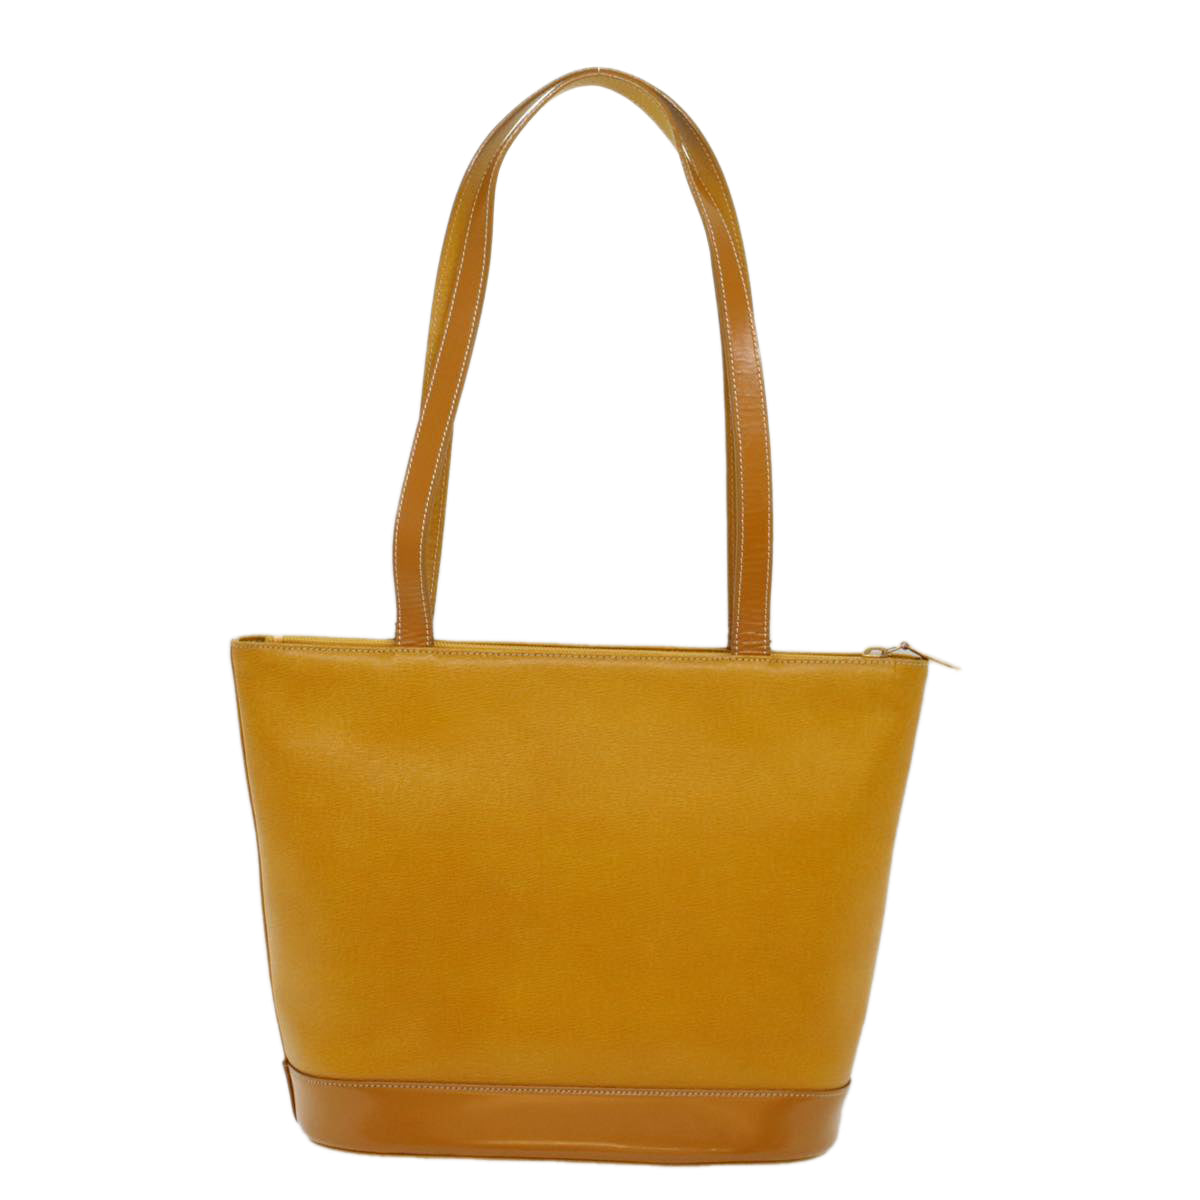 Burberrys Shoulder Bag Leather Yellow Auth bs7351